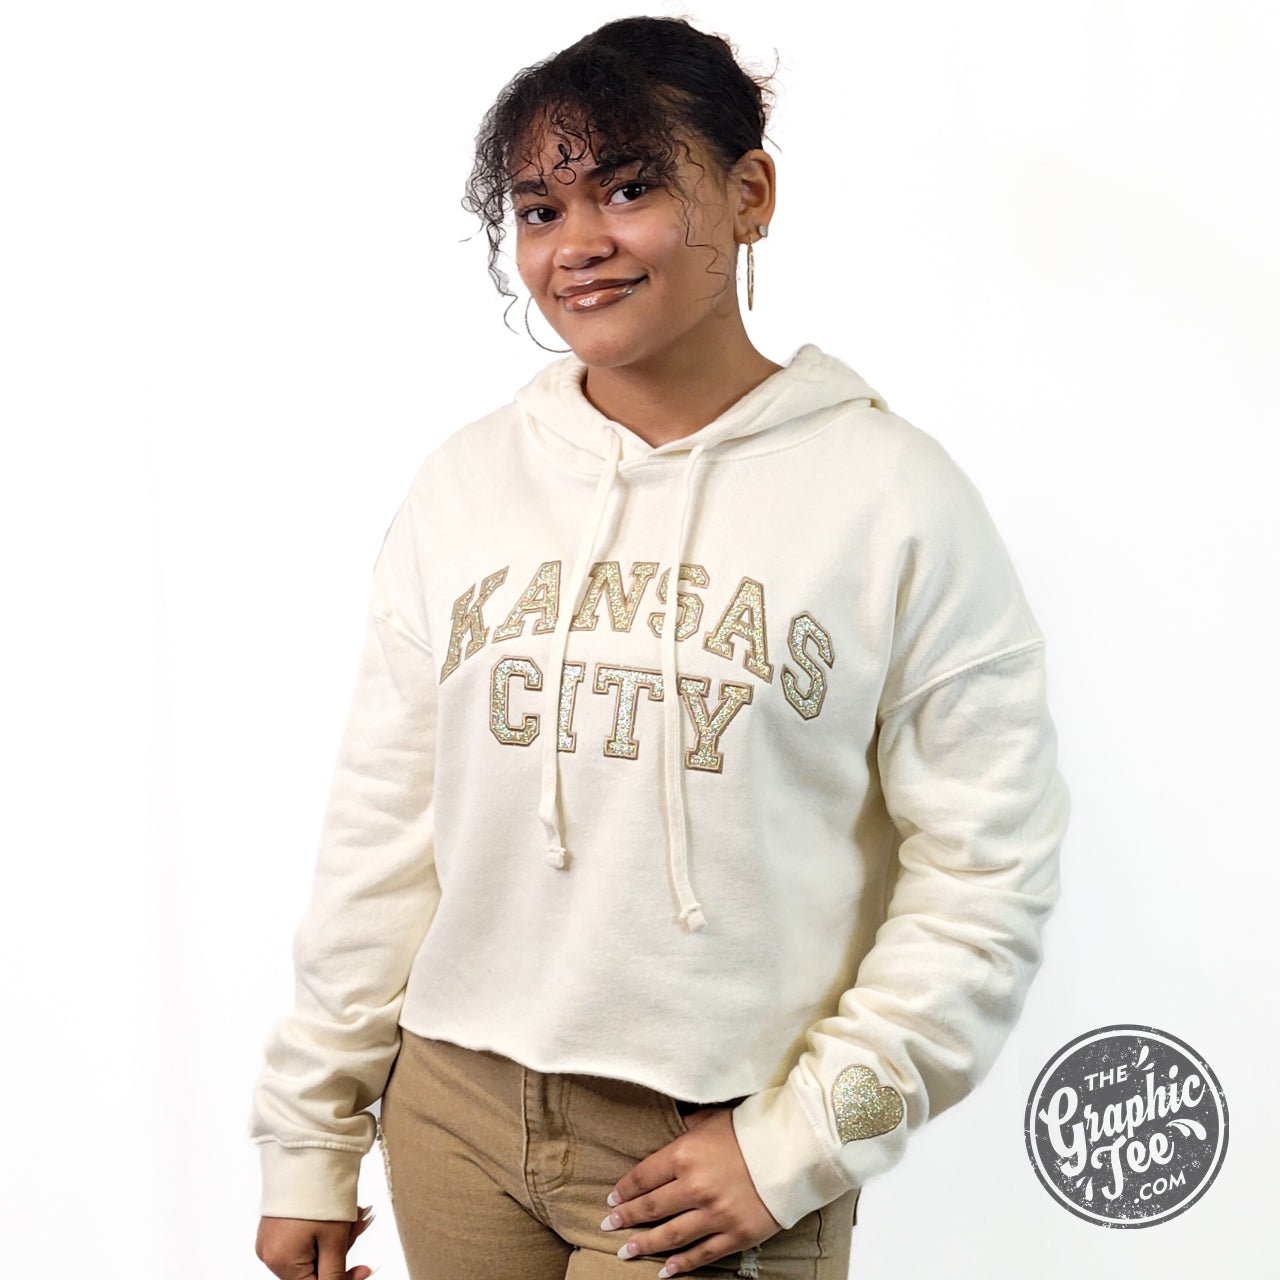 Kansas City Vintage Gold Glitter Tackle Twill Crop Hoodie - The Graphic Tee